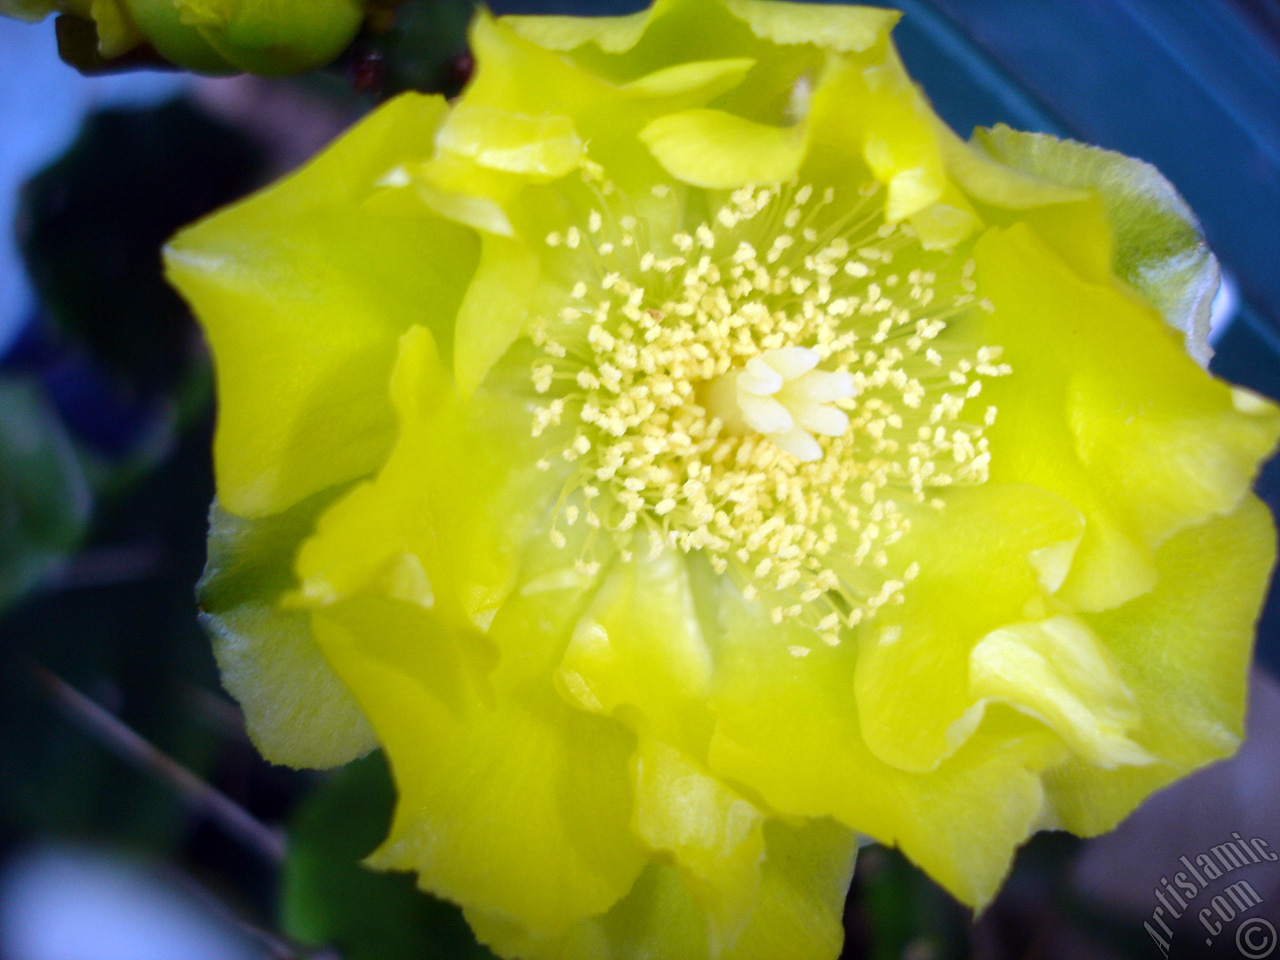 Prickly Pear with yellow flower.
